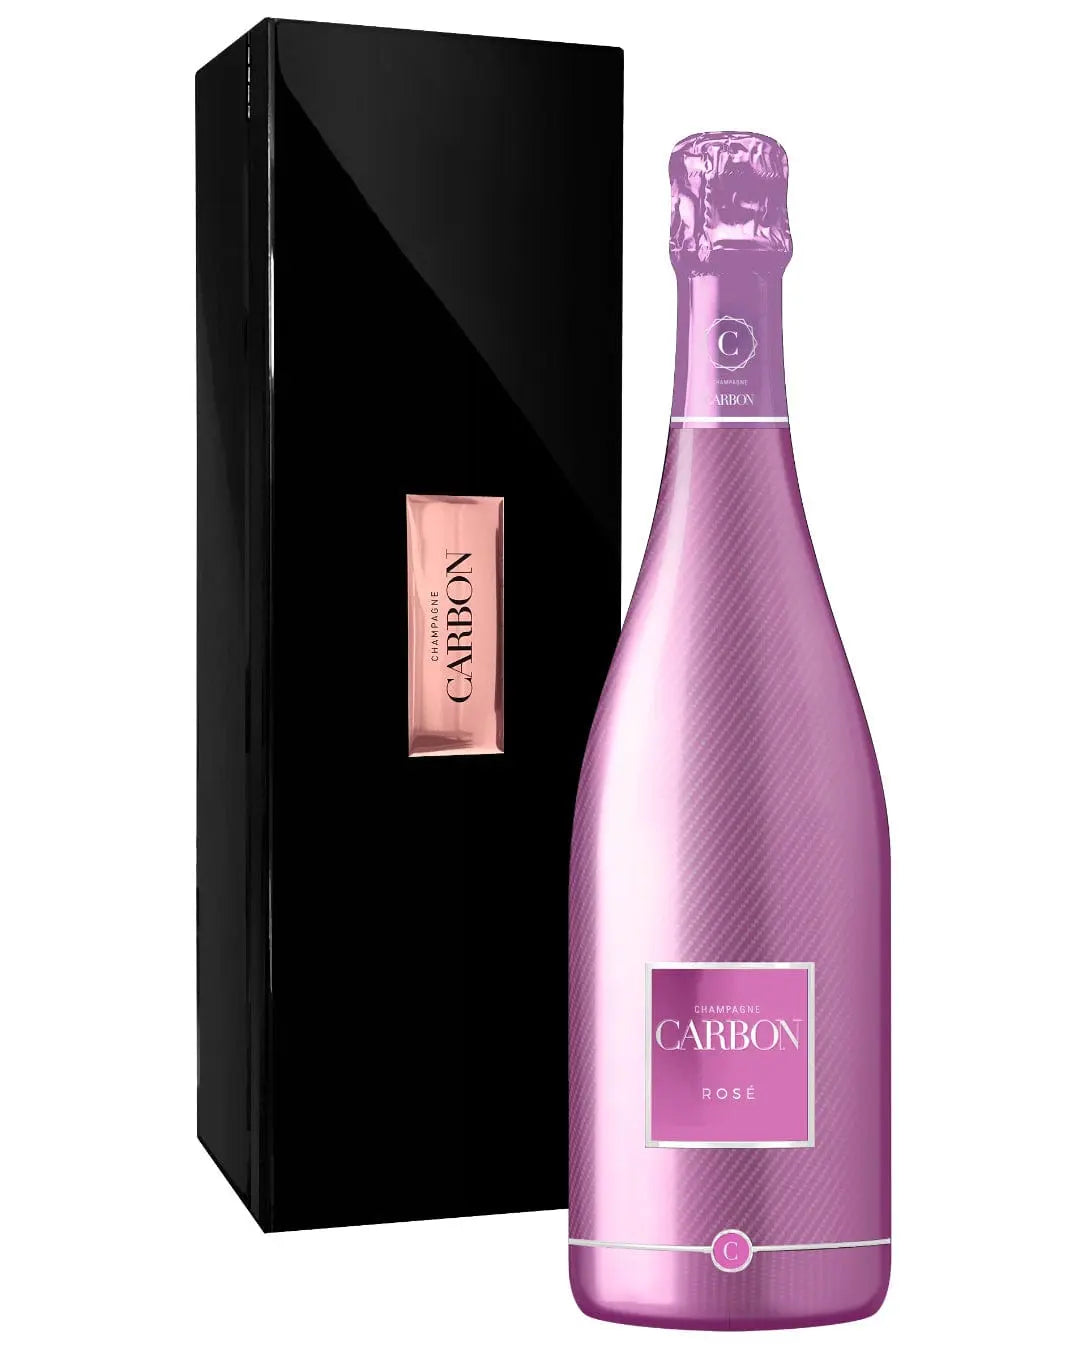 Carbon Cuvee Rosé with Luxury Box, 75 cl Champagne & Sparkling